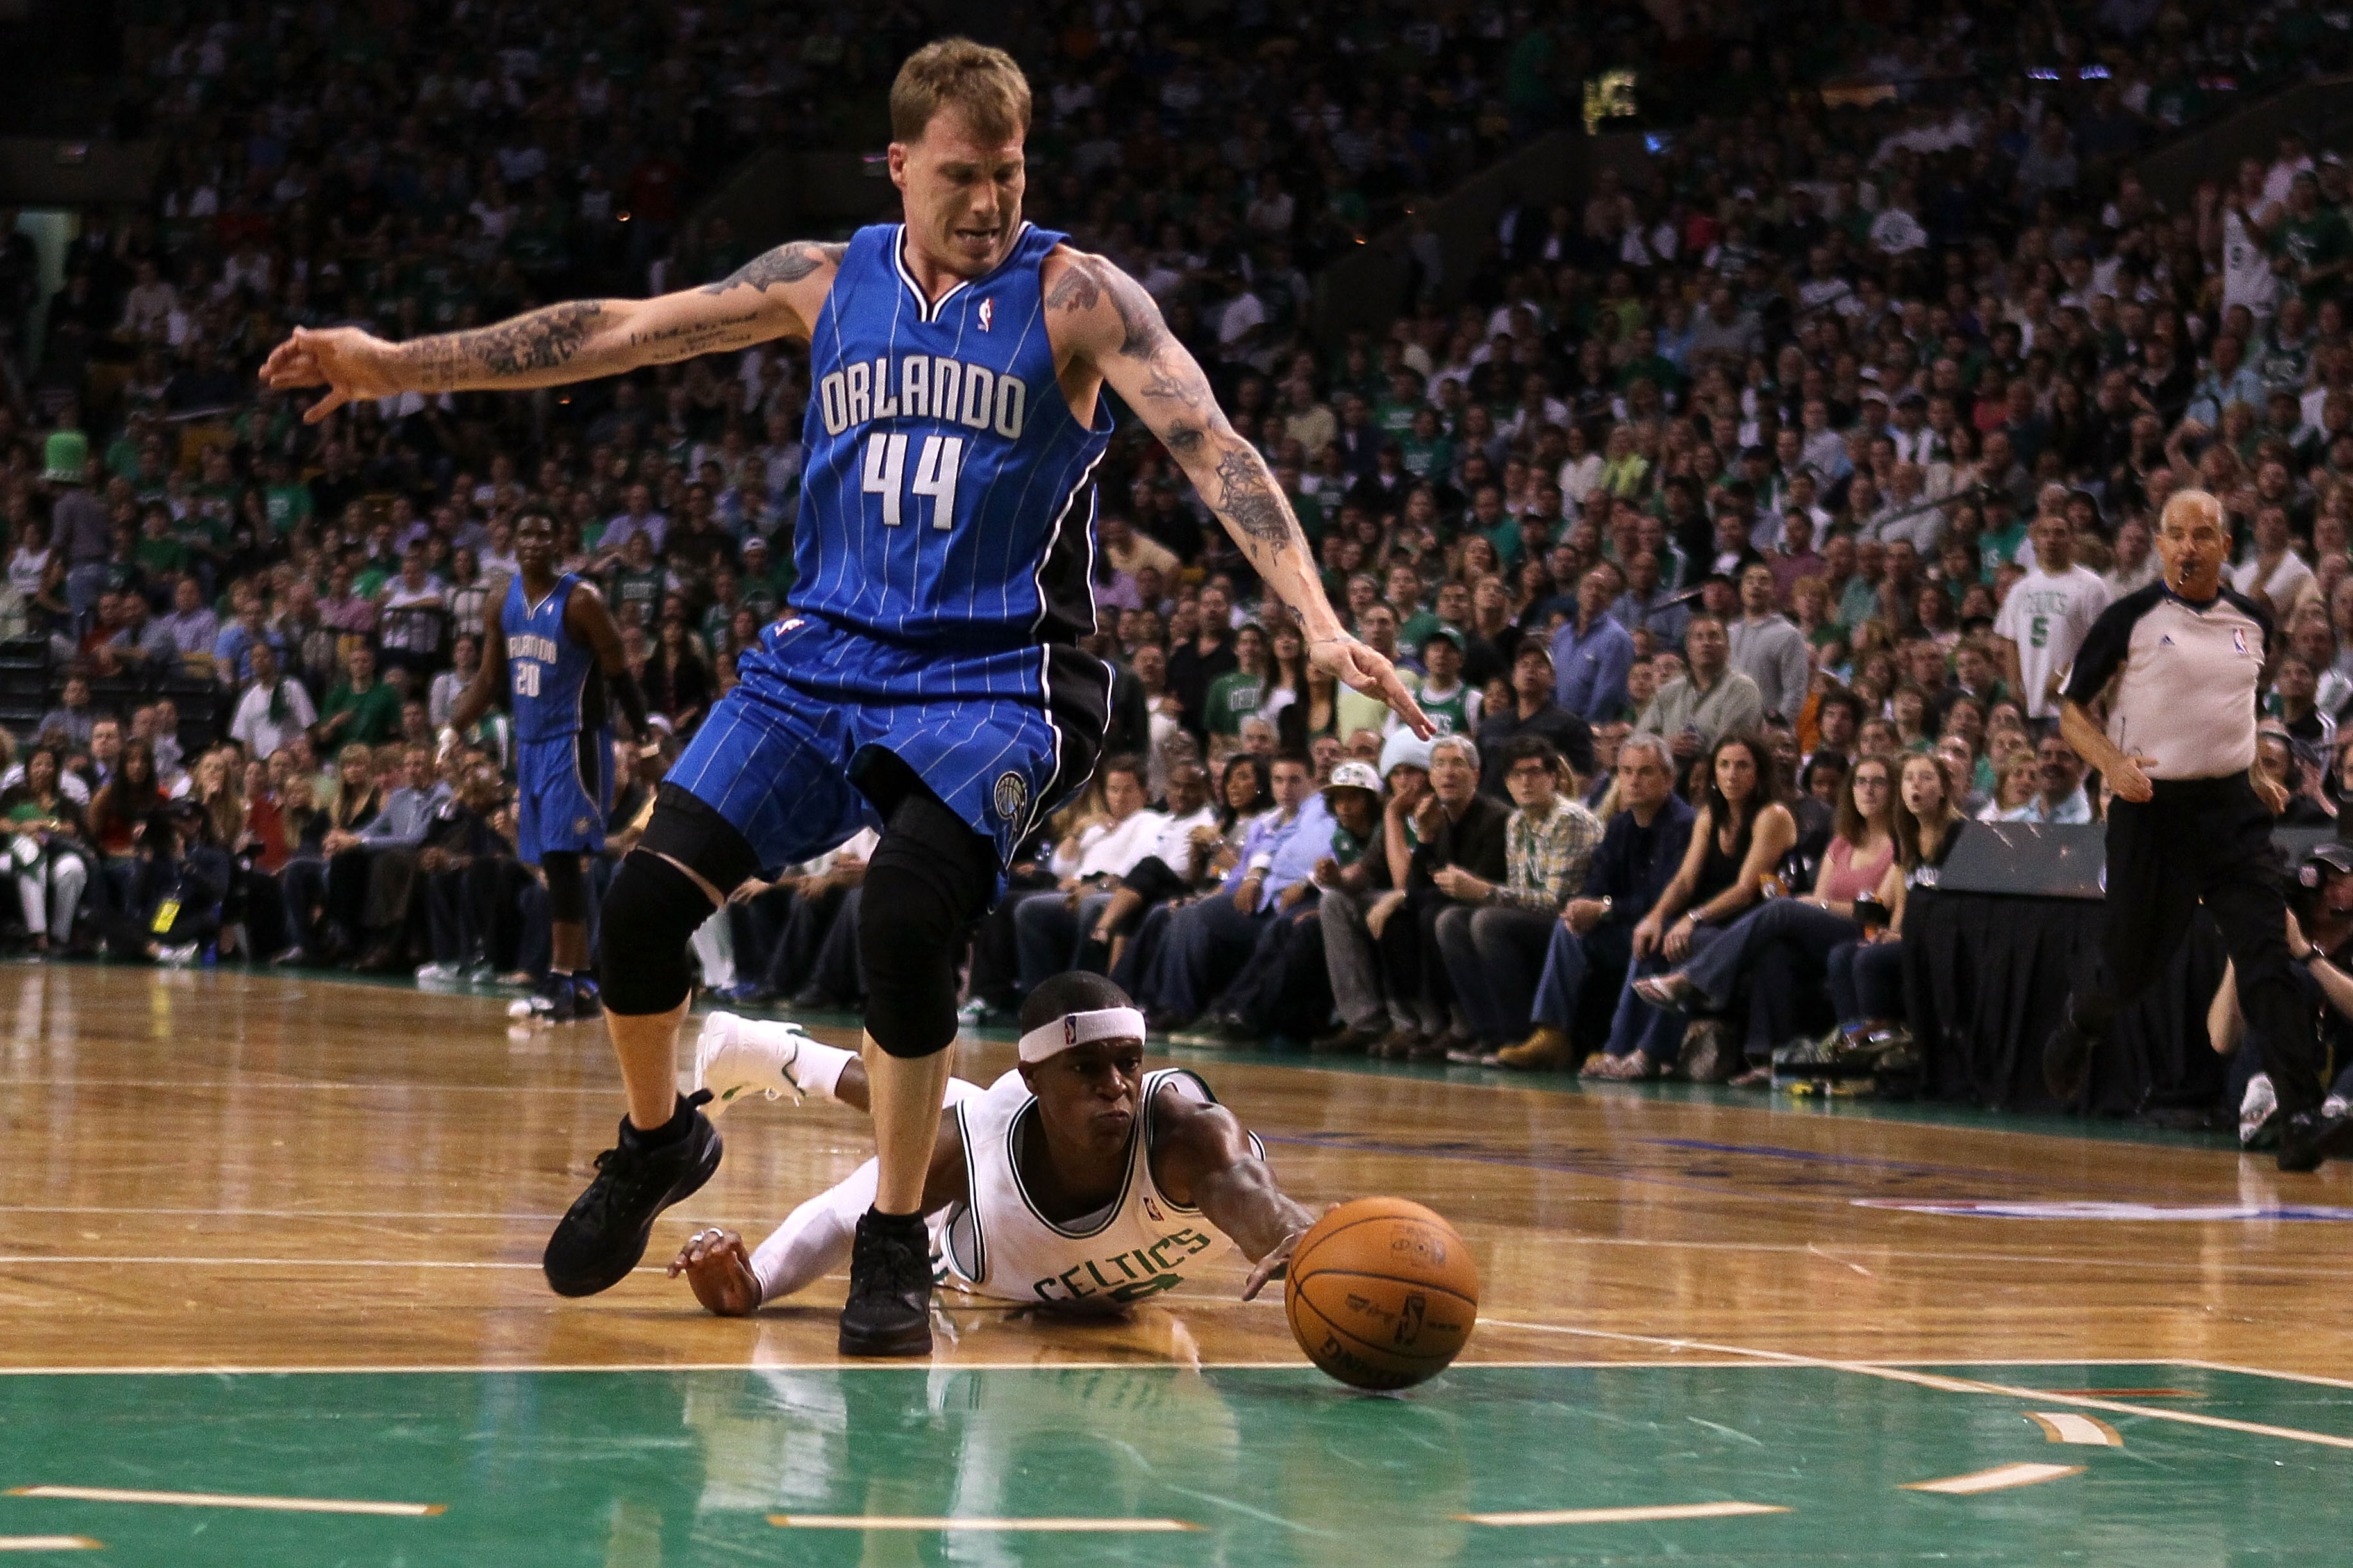 BOSTON - MAY 22:  Rajon Rondo #9 of the Boston Celtics dives for a loose ball against Jason Williams #44 of the Orlando Magic at TD Banknorth Garden in Game Three of the Eastern Conference Finals during the 2010 NBA Playoffs on May 22, 2010 in Boston, Mas